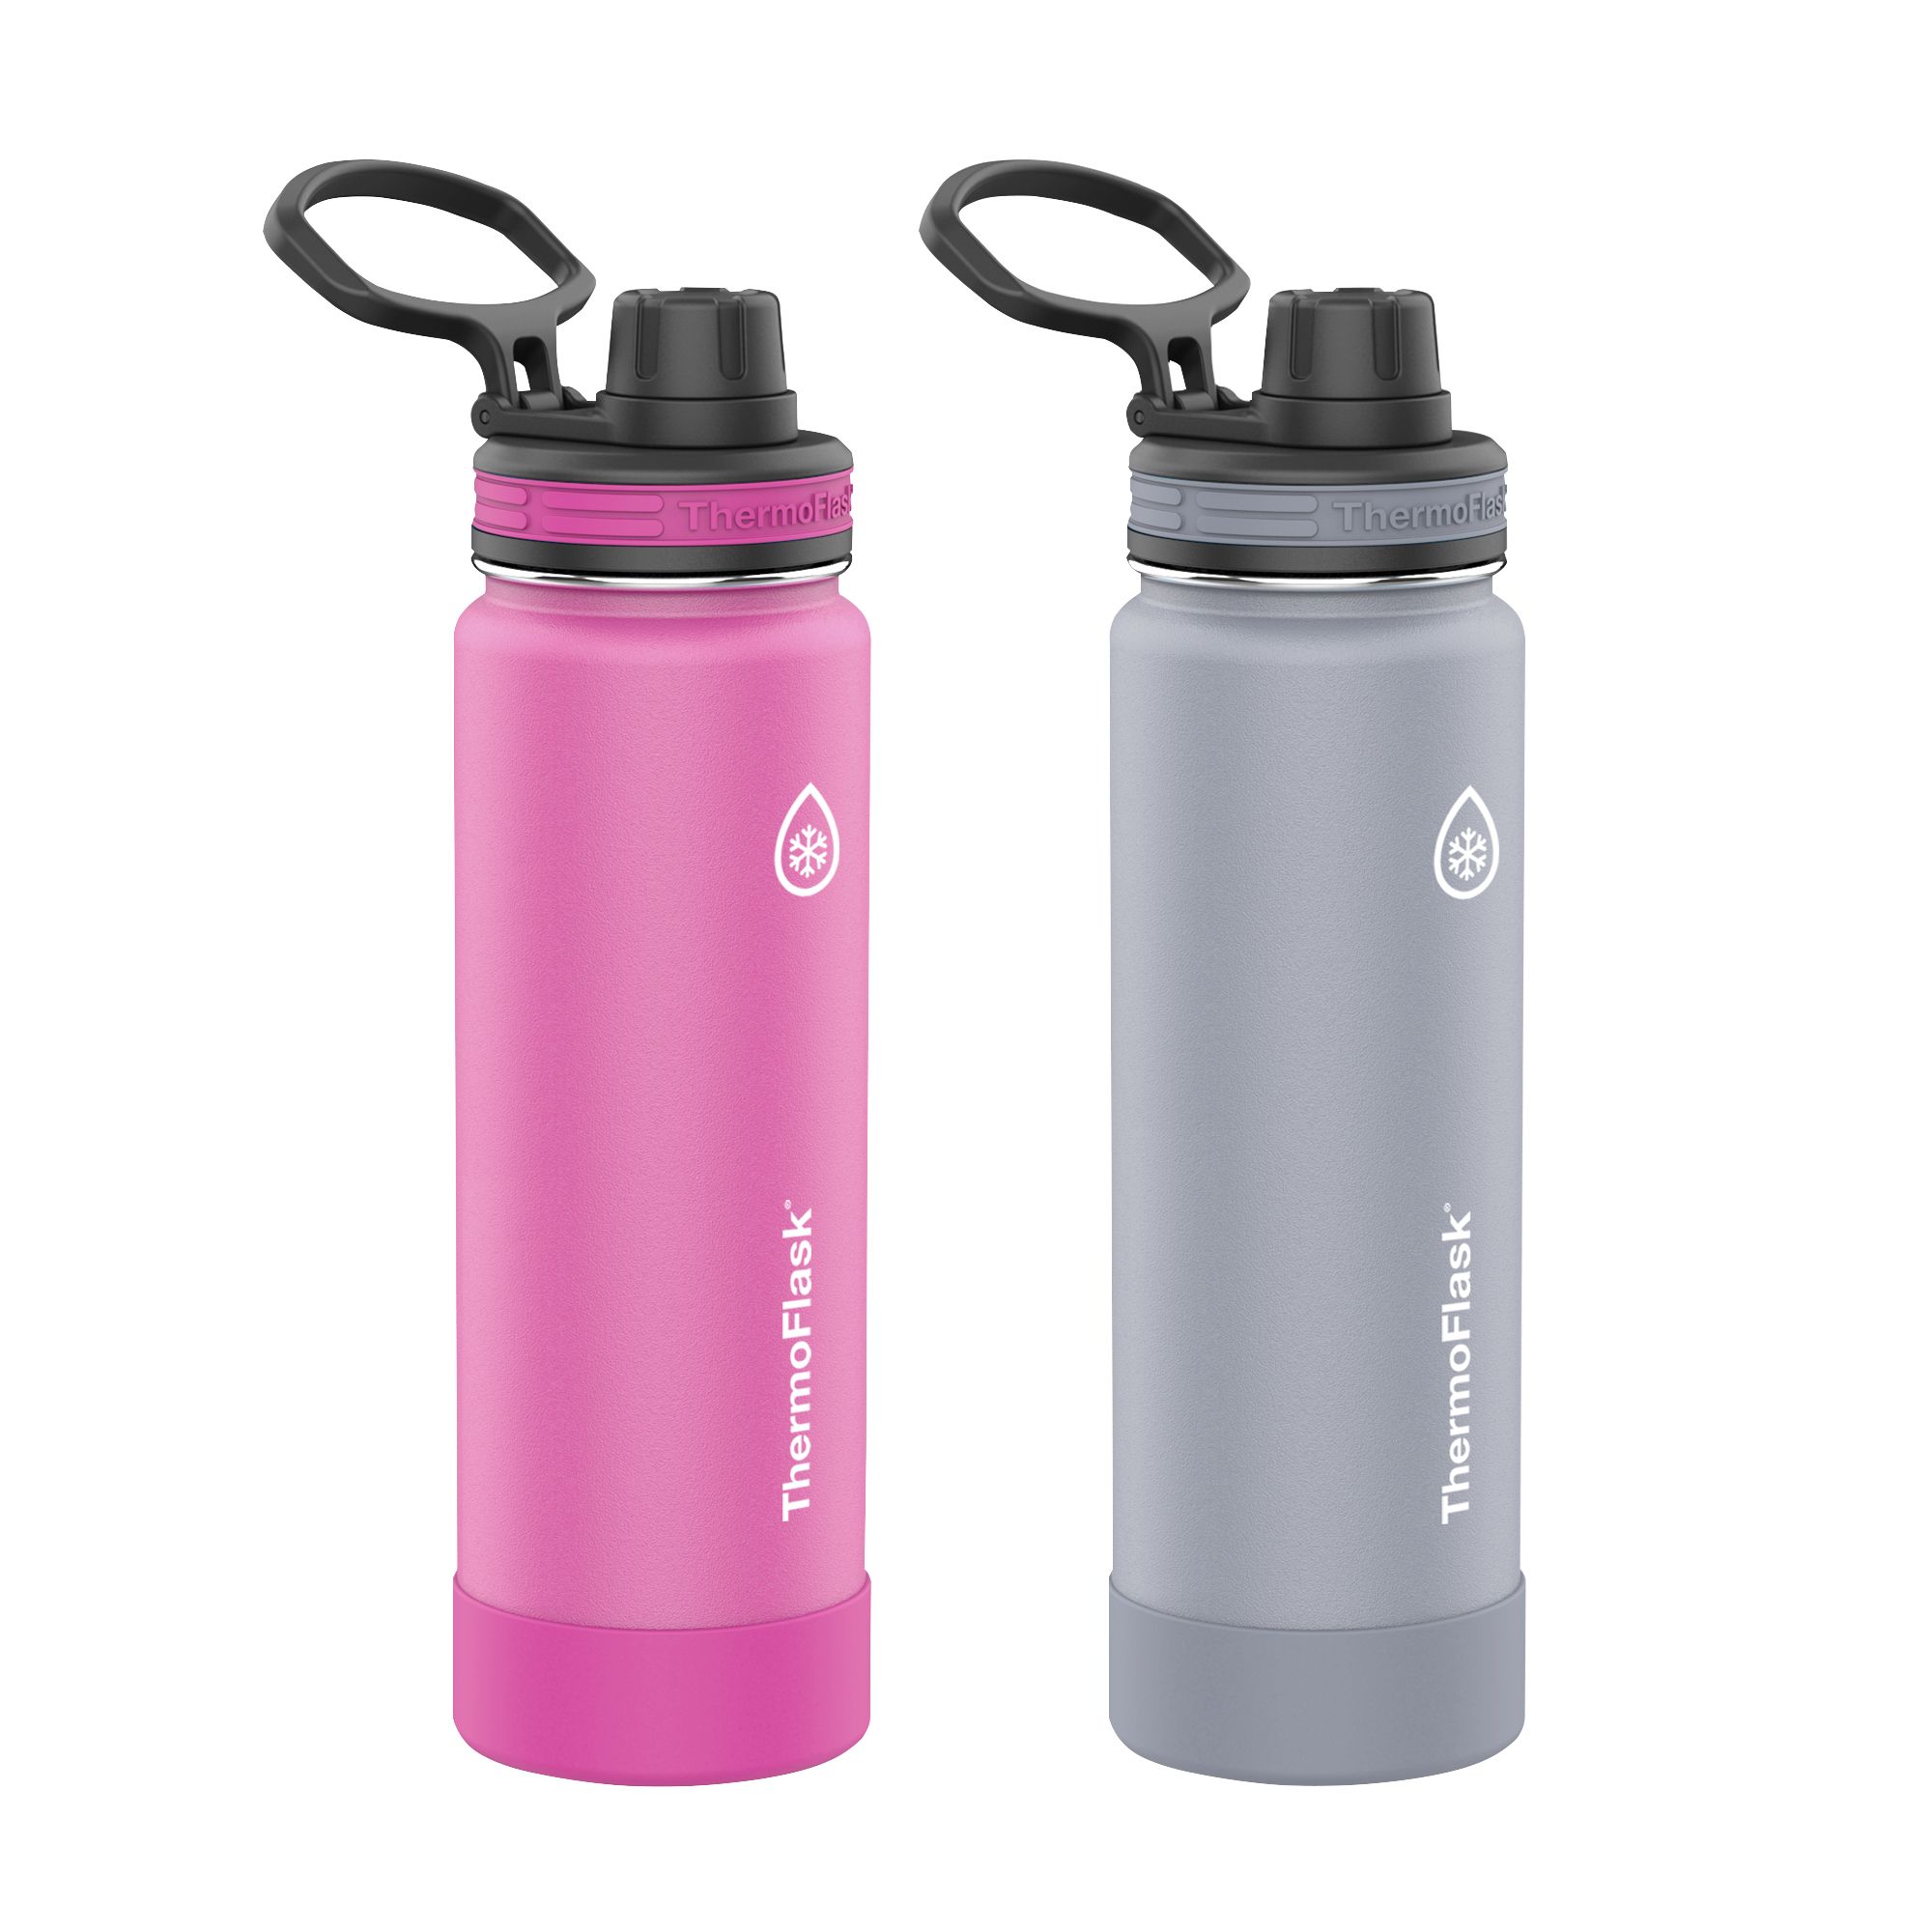 Takeya 24 oz. ThermoFlask Insulated Stainless Steel Water Bottle